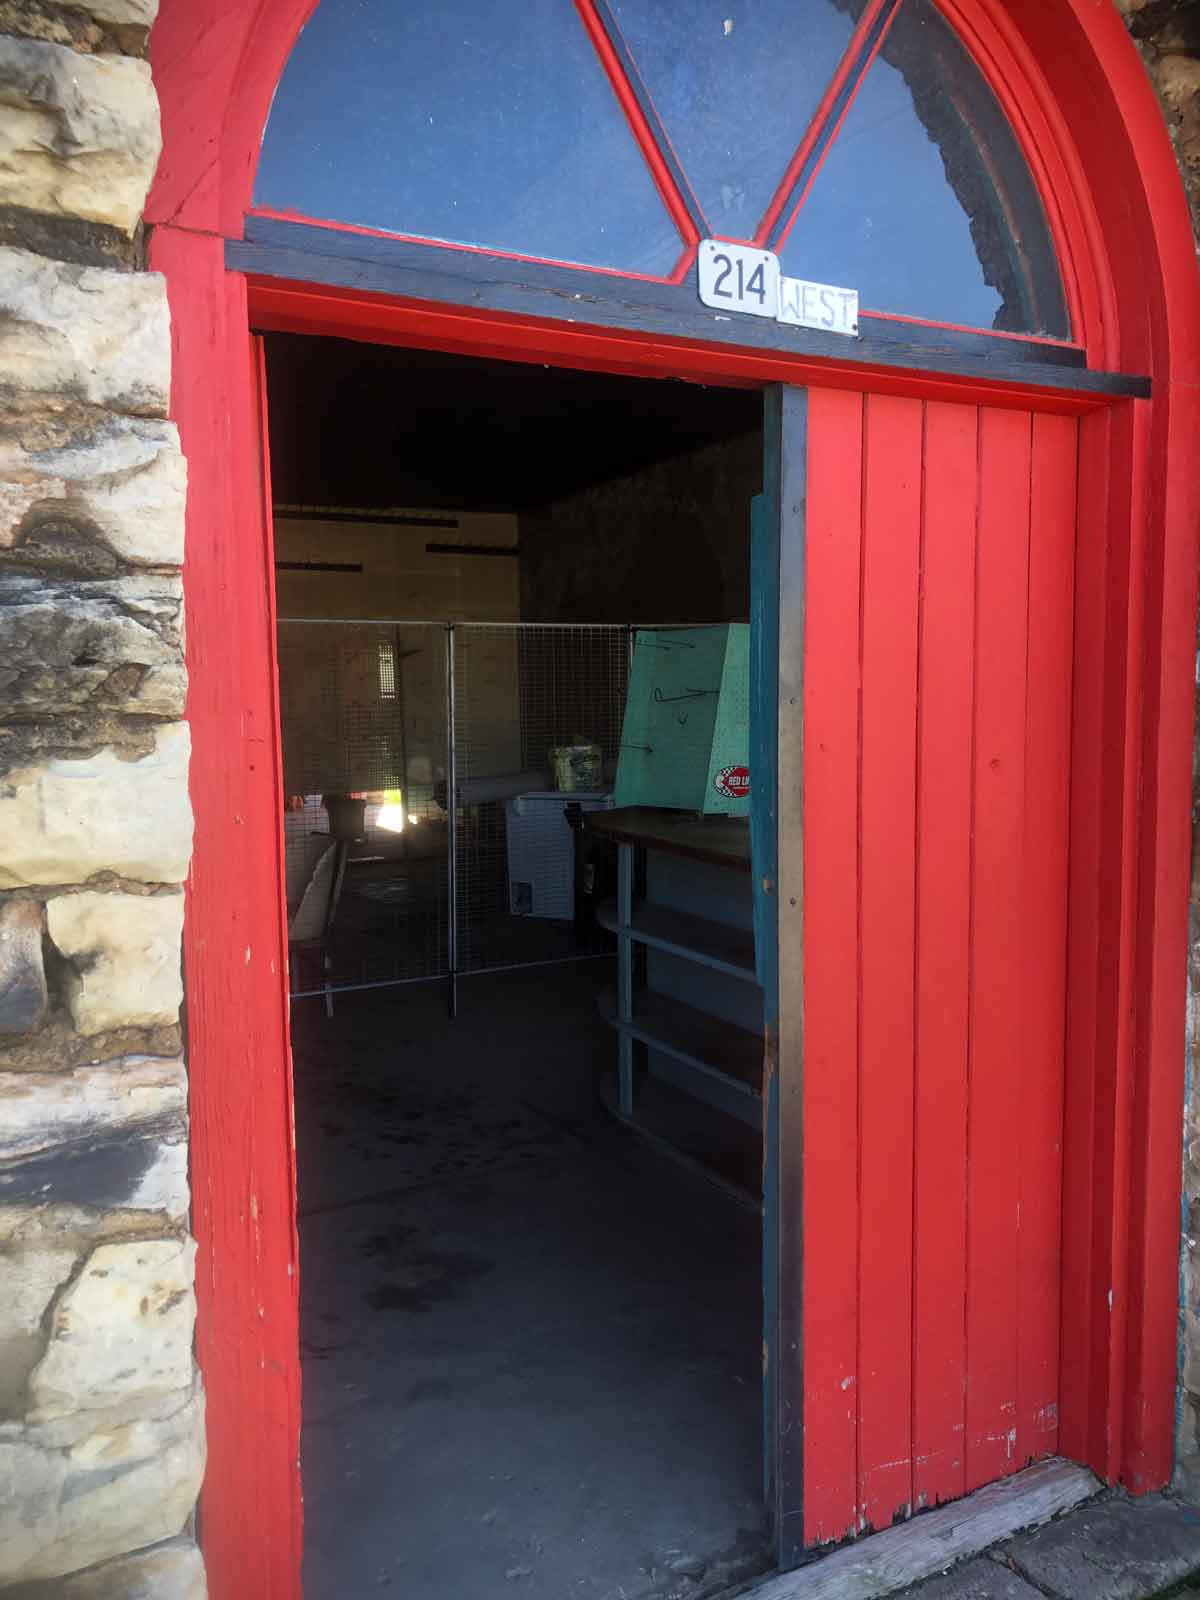 Come inside for a sneak peek! We got a lot done over the weekend and we're ready for our first open day on April 1.